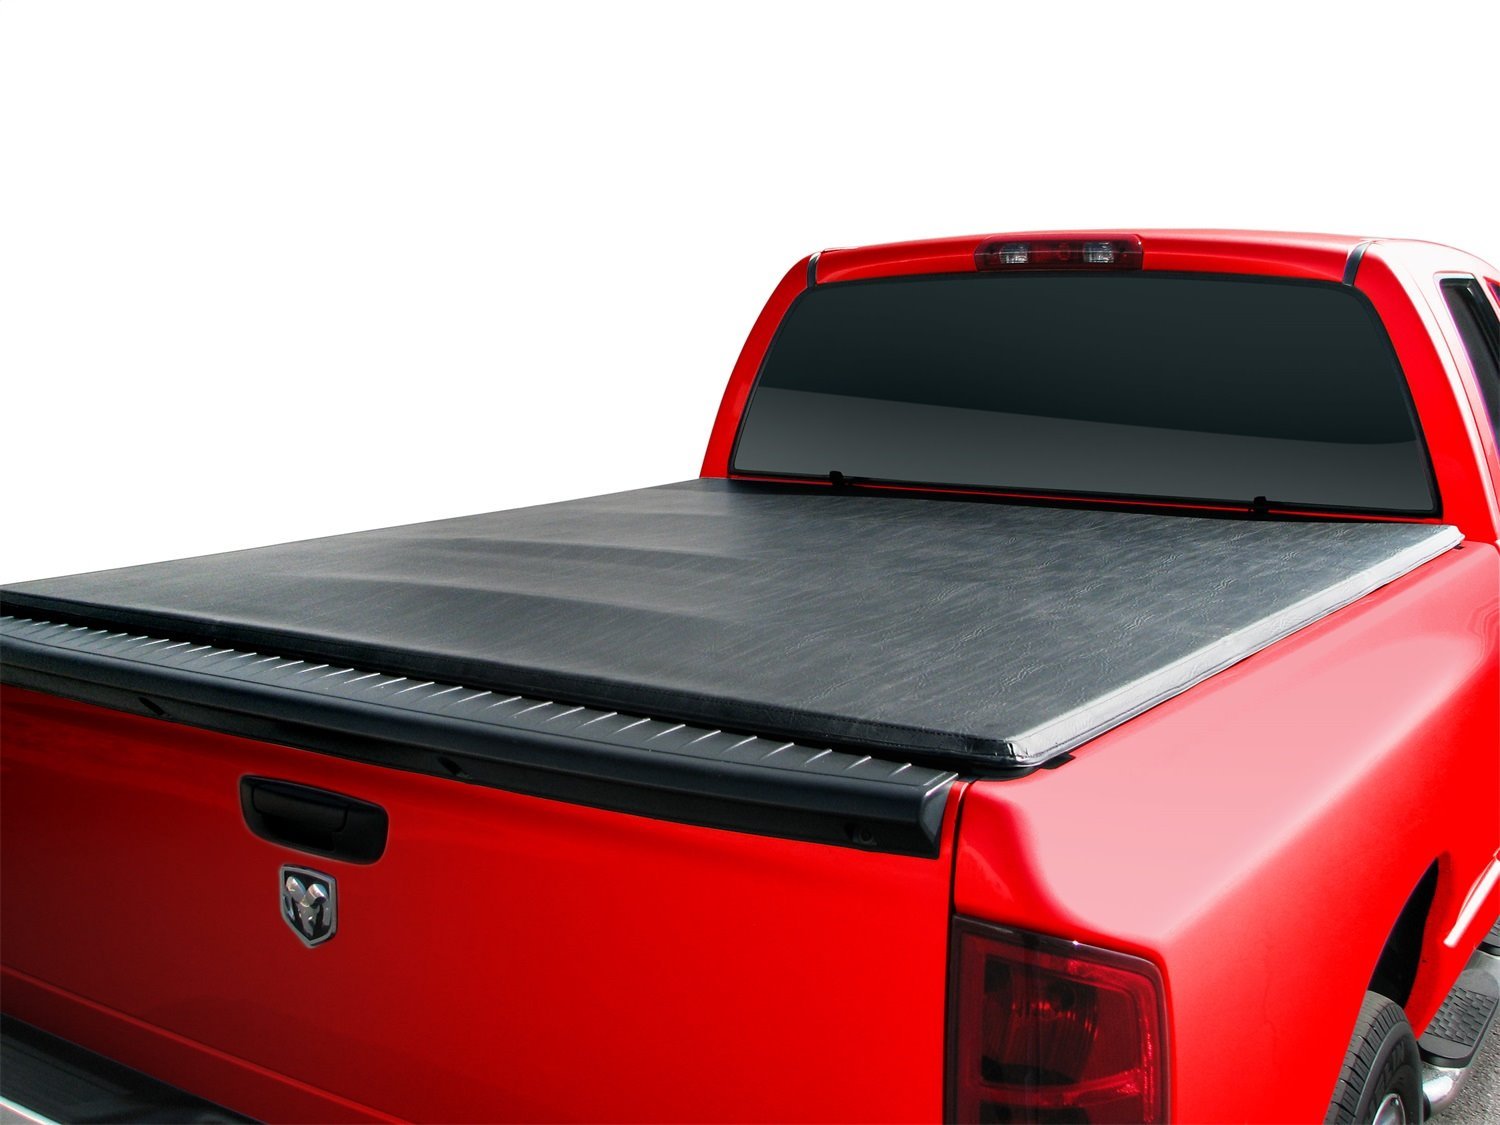 Tri Fold Tonneau Covers are designed to haul and secure your gear. Features a light weight and low a